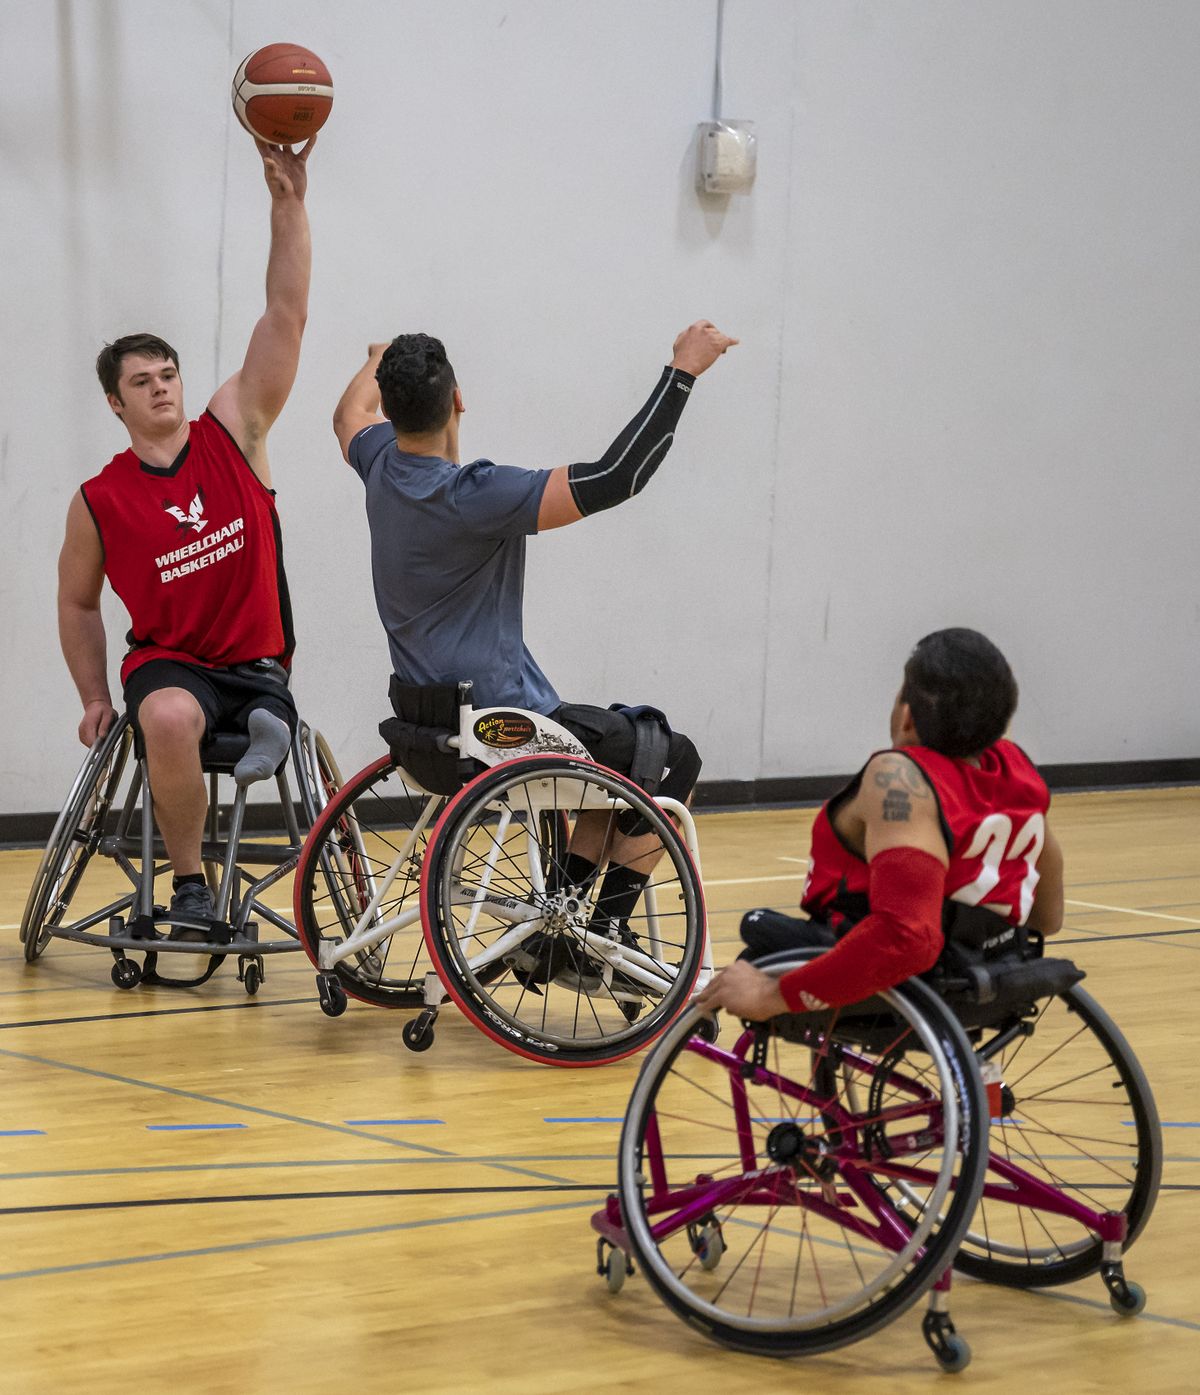 Tyler Hinshaw prepares to pass over coach David Evjen to Bob Hunt during a wheelchair basketball scrimmage at Eastern Washington University on Nov. 20.  (Colin Mulvany/THE SPOKESMAN-REVIEW)